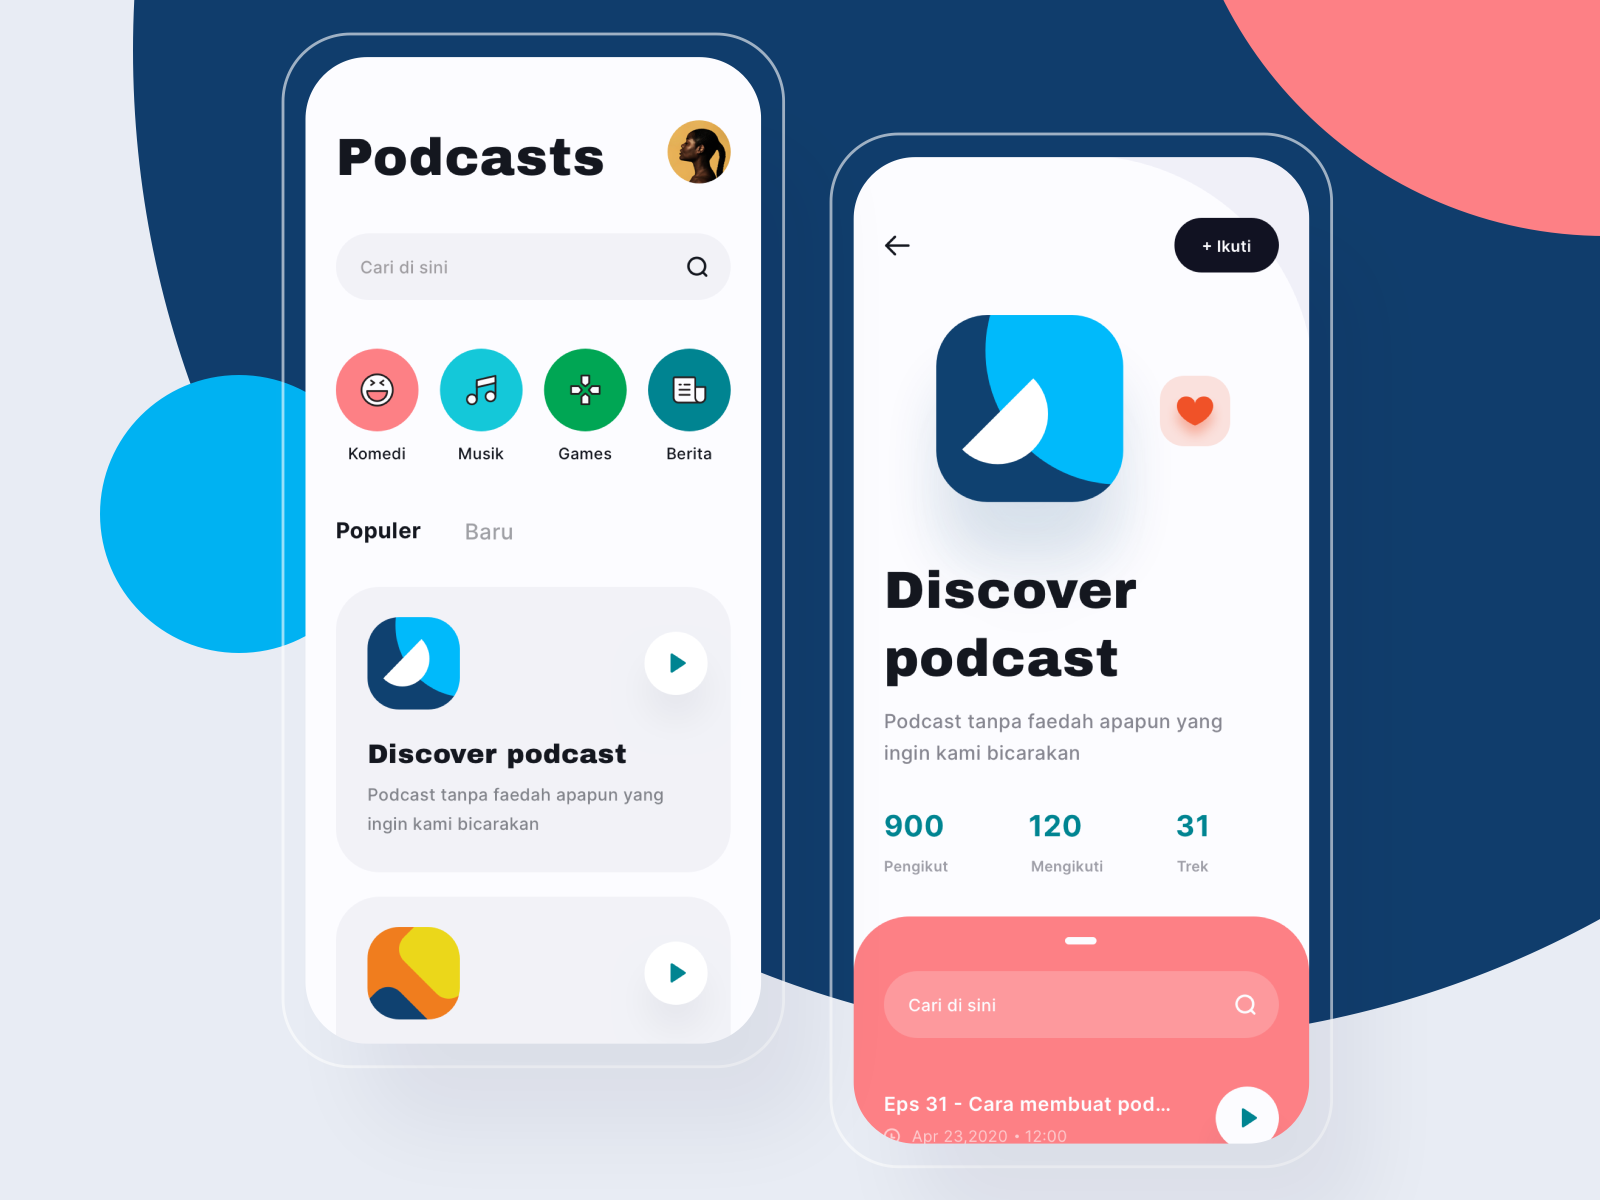 Podcasts App - Exploration by Dindra Desmipian on Dribbble